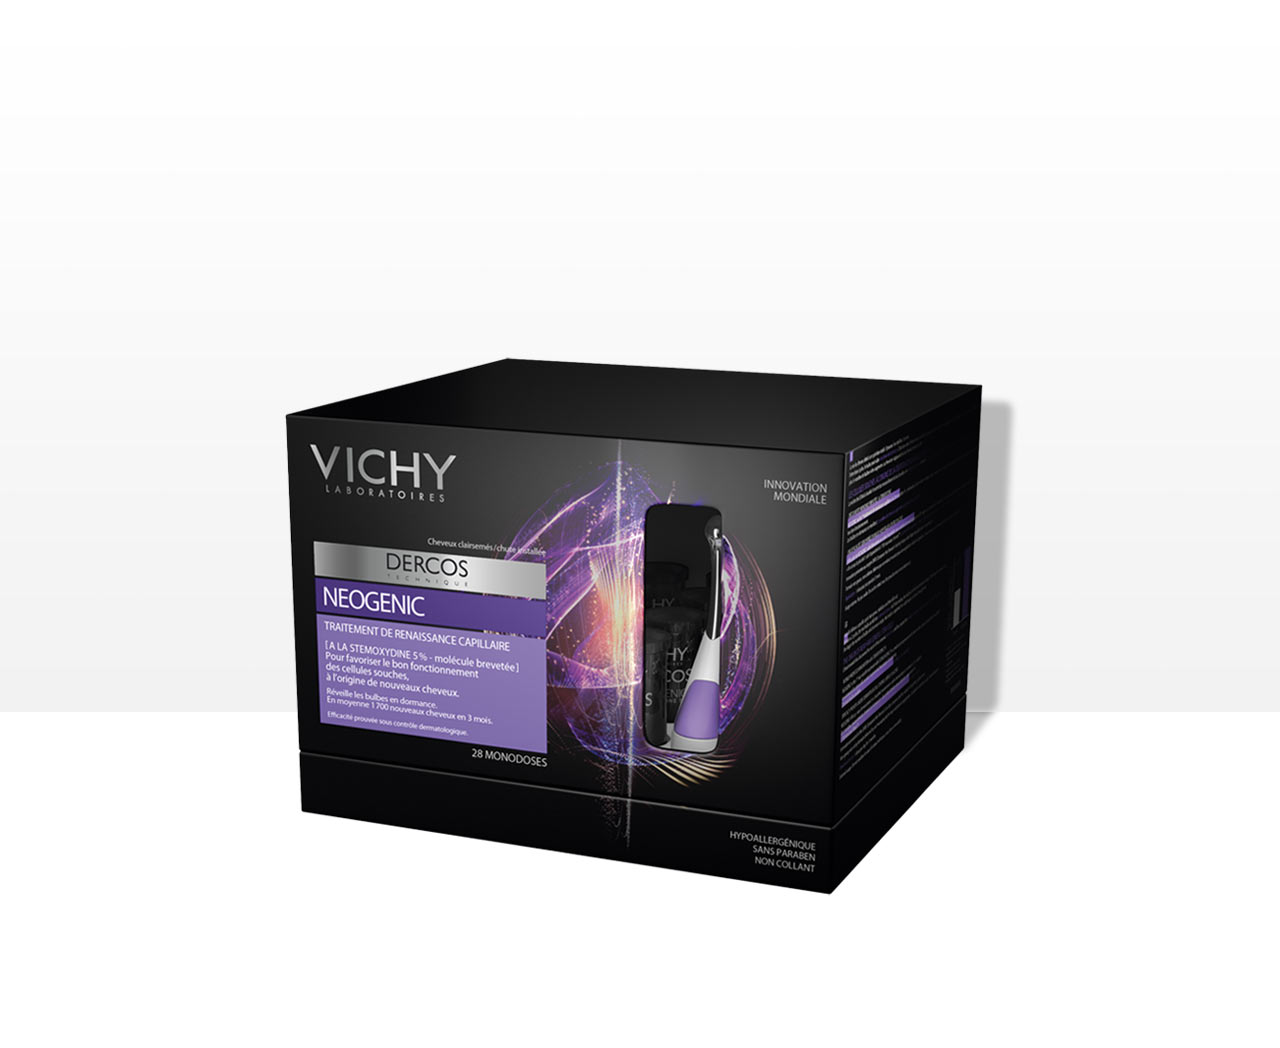 Download NEOGENIC Daily Monodose Treatment DERCOS - Vichy Laboratoires: cosmetics, beauty products, face ...